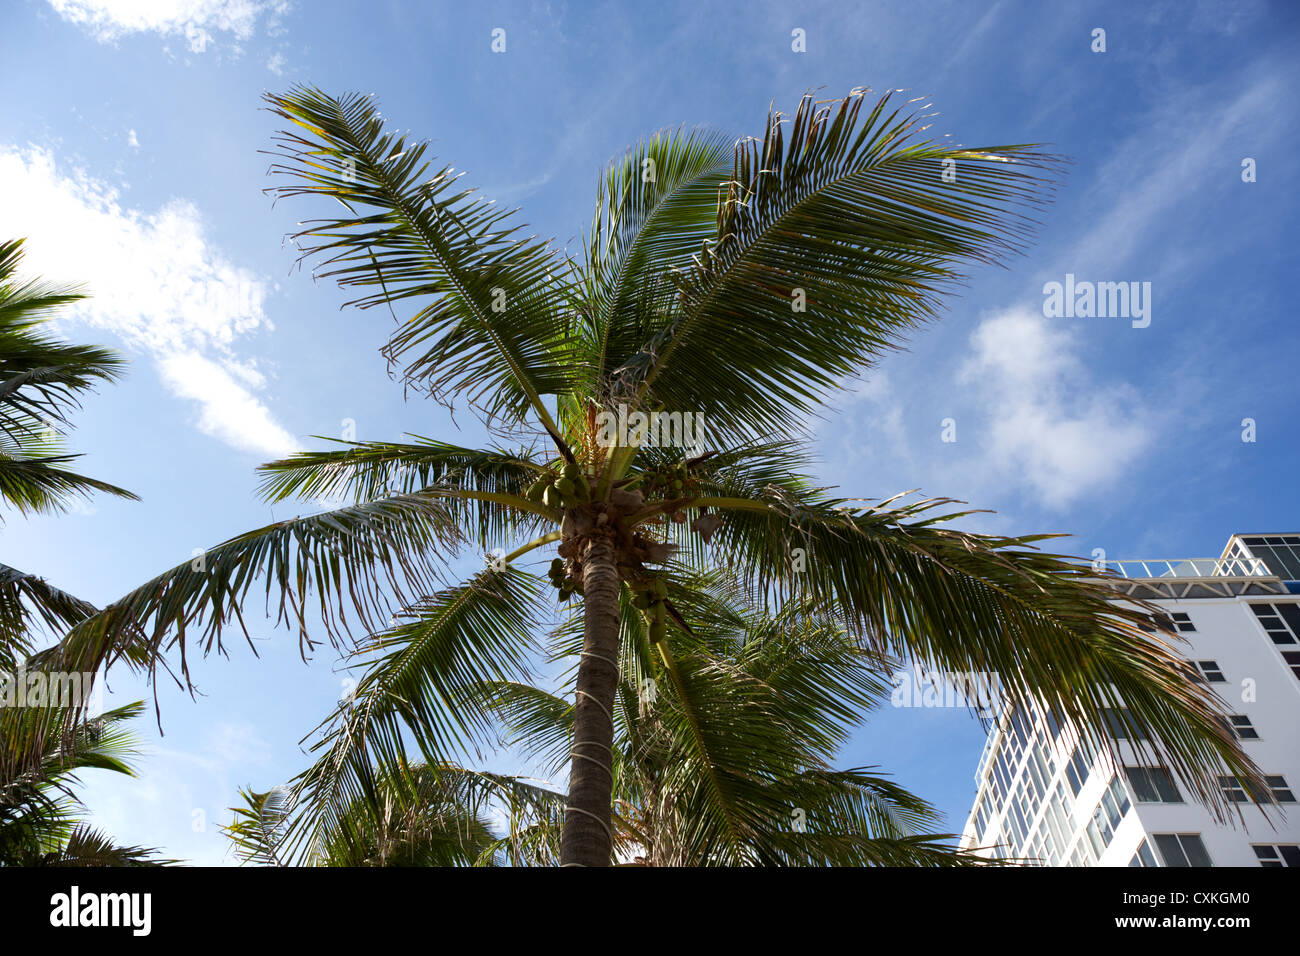 coconut palm tree next to hotel buildings fort lauderdale beach florida usa Stock Photo